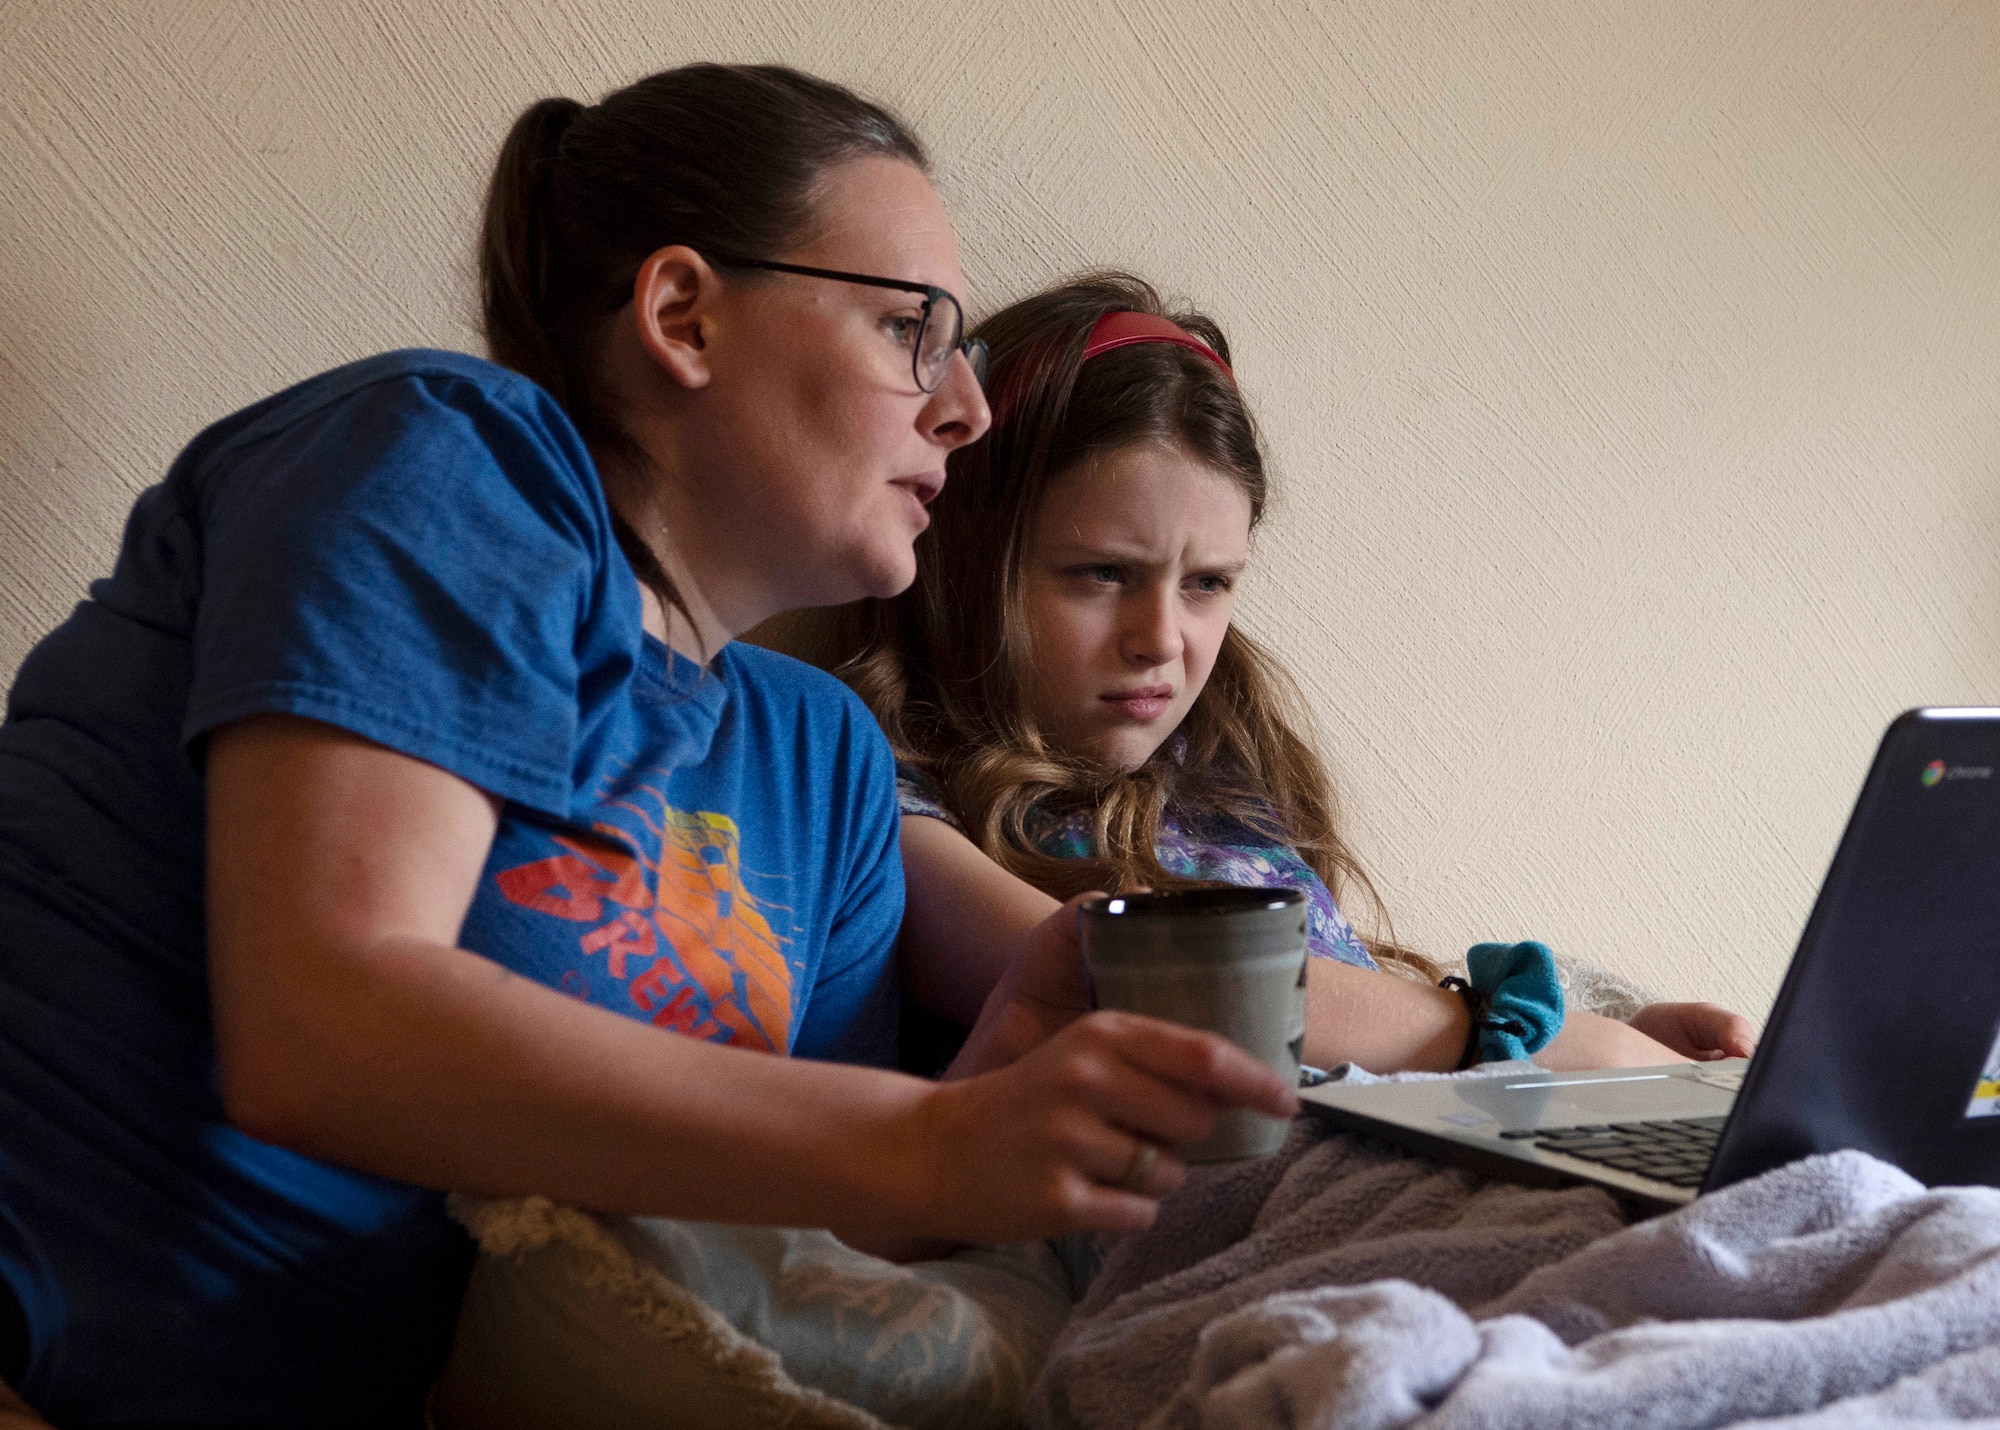 Beth and Bailey, wife and daughter of U.S. Army Sgt. 1st Class Cody Camp, U.S. Army Recruiting Command senior guidance counselor, read over a classwork assignment at their home in Kaiserslautern, Germany, April 14, 2020.